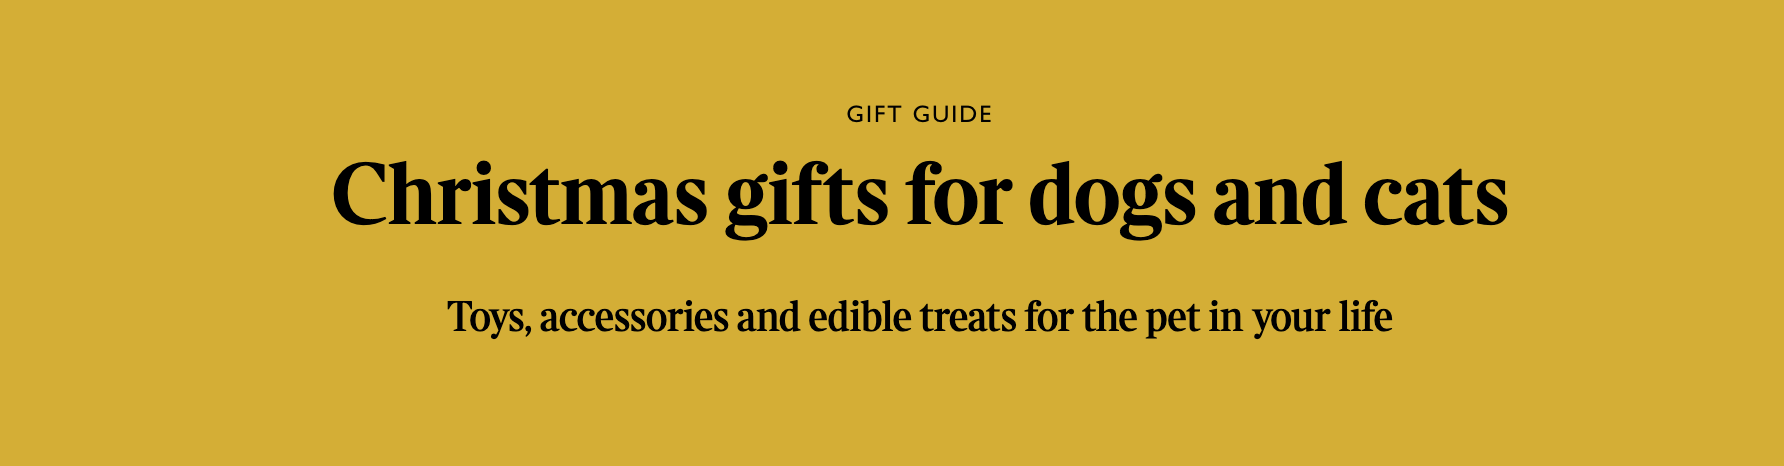 The Times: Christmas Gifts For Dogs and Cats